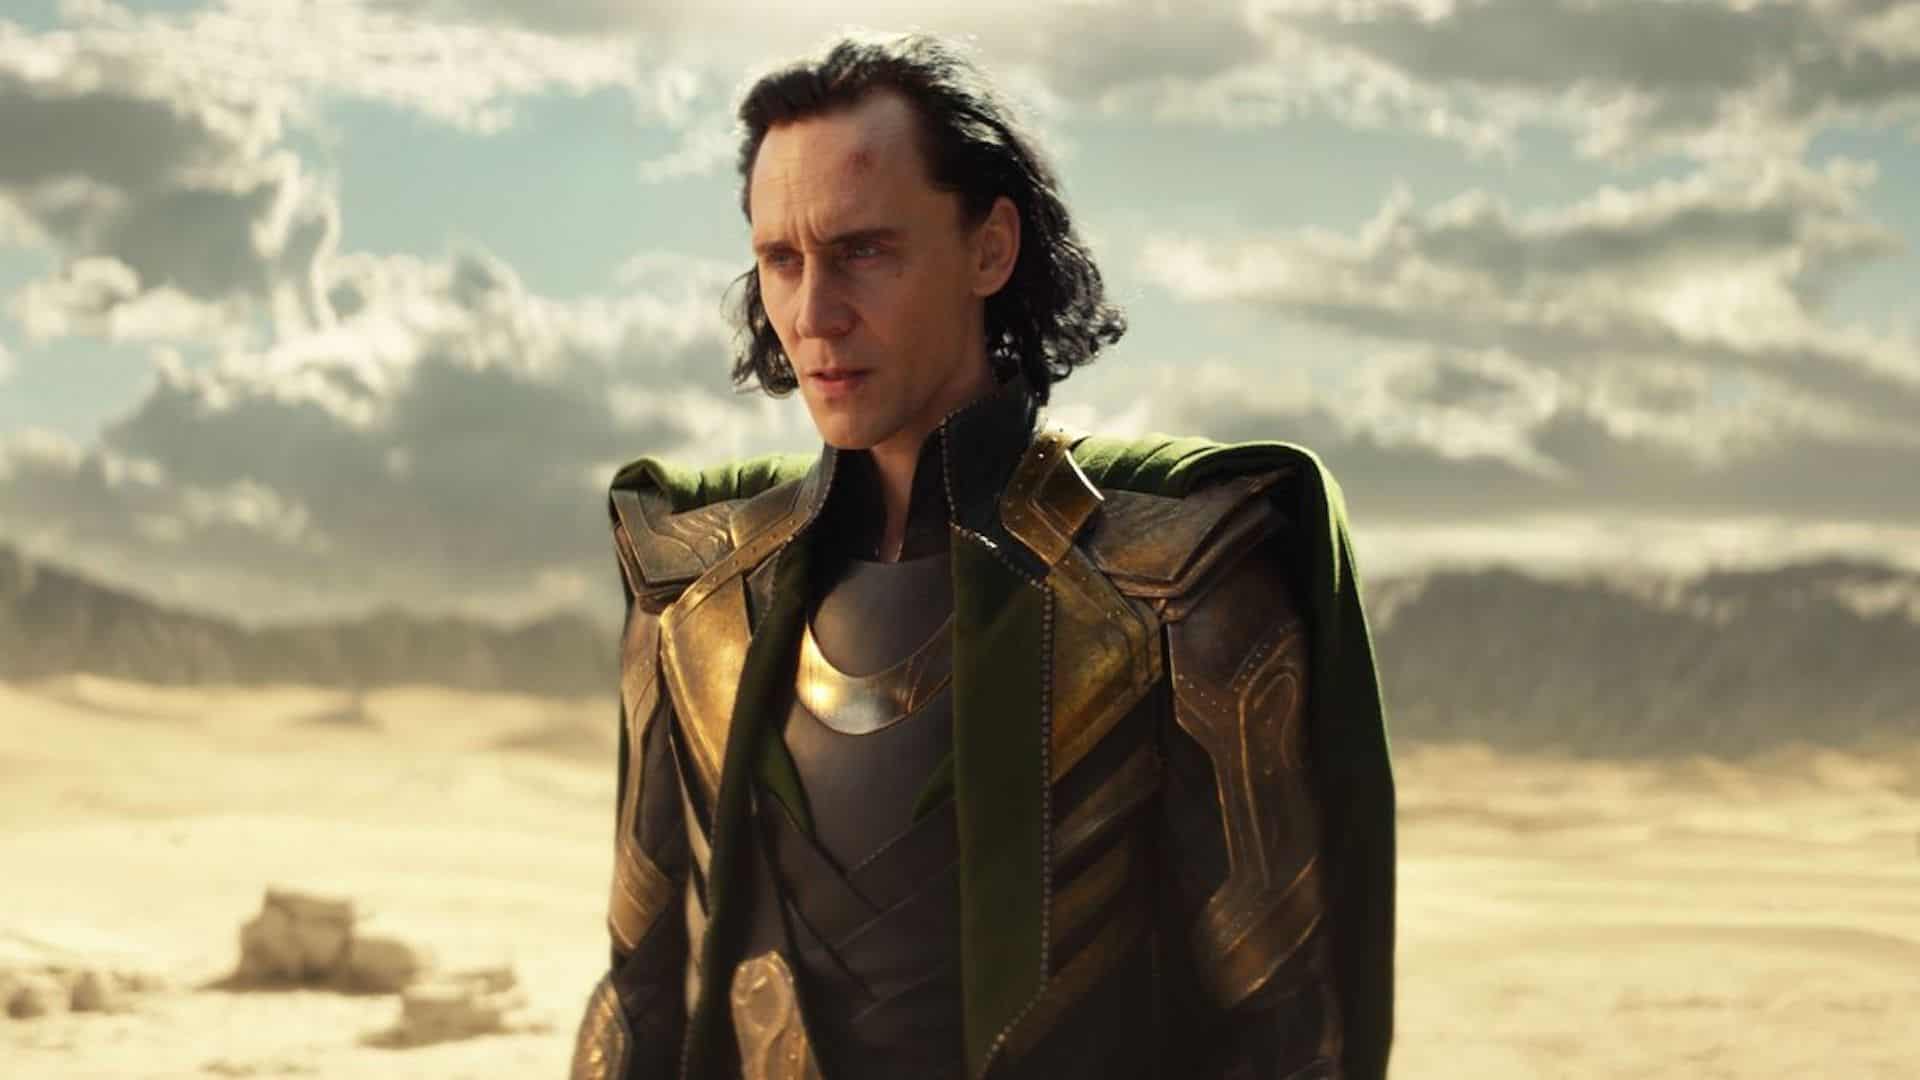 Marvel’s “Loki” and the Quest for Glorious Purpose